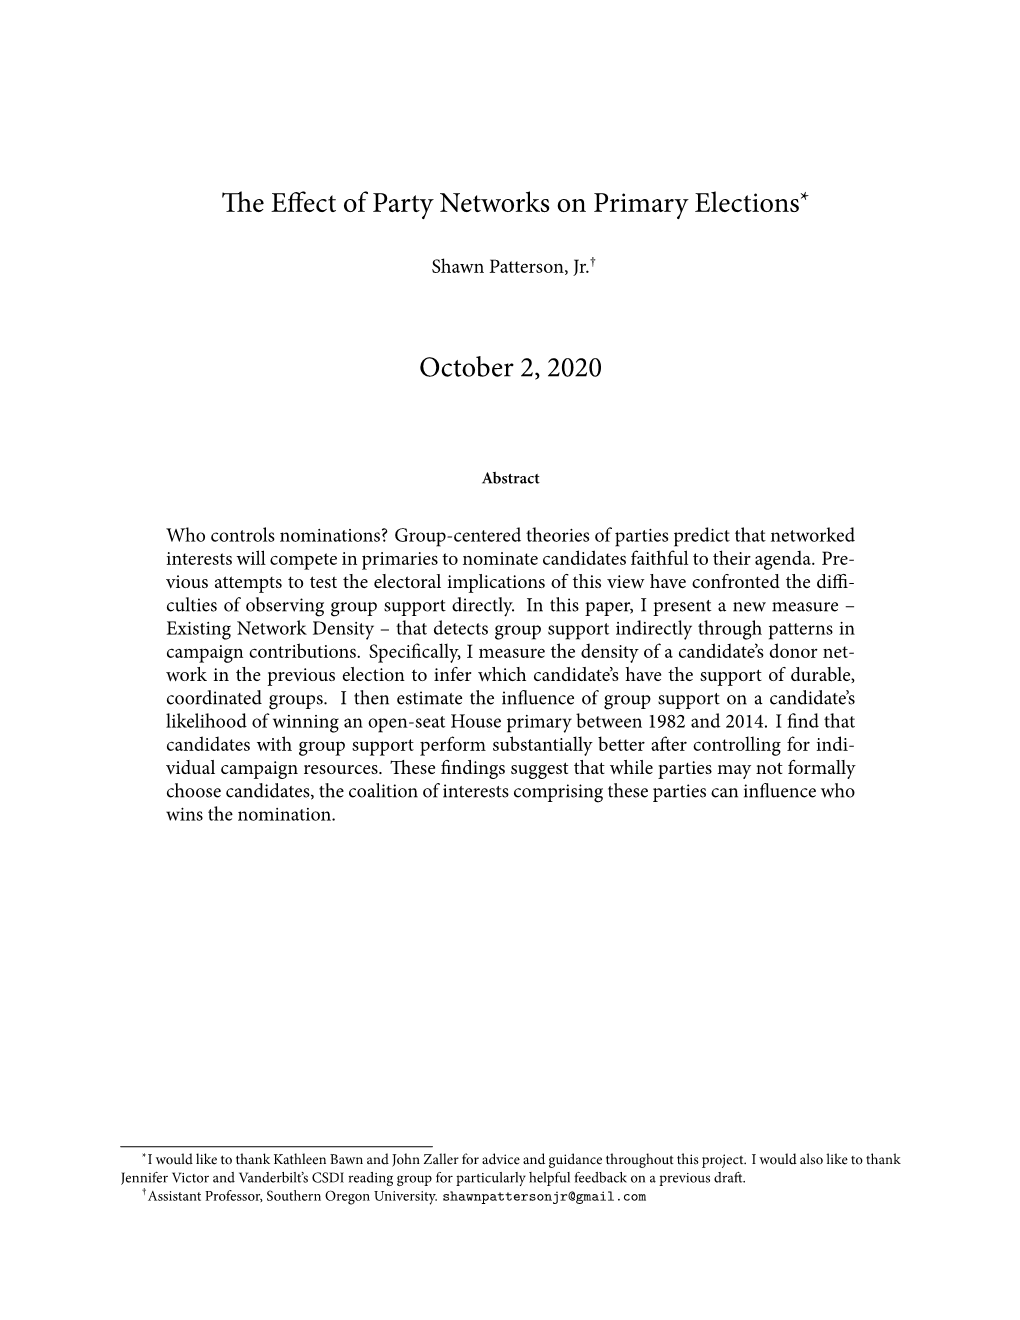 The Effect of Party Networks on Primary Elections October 2, 2020